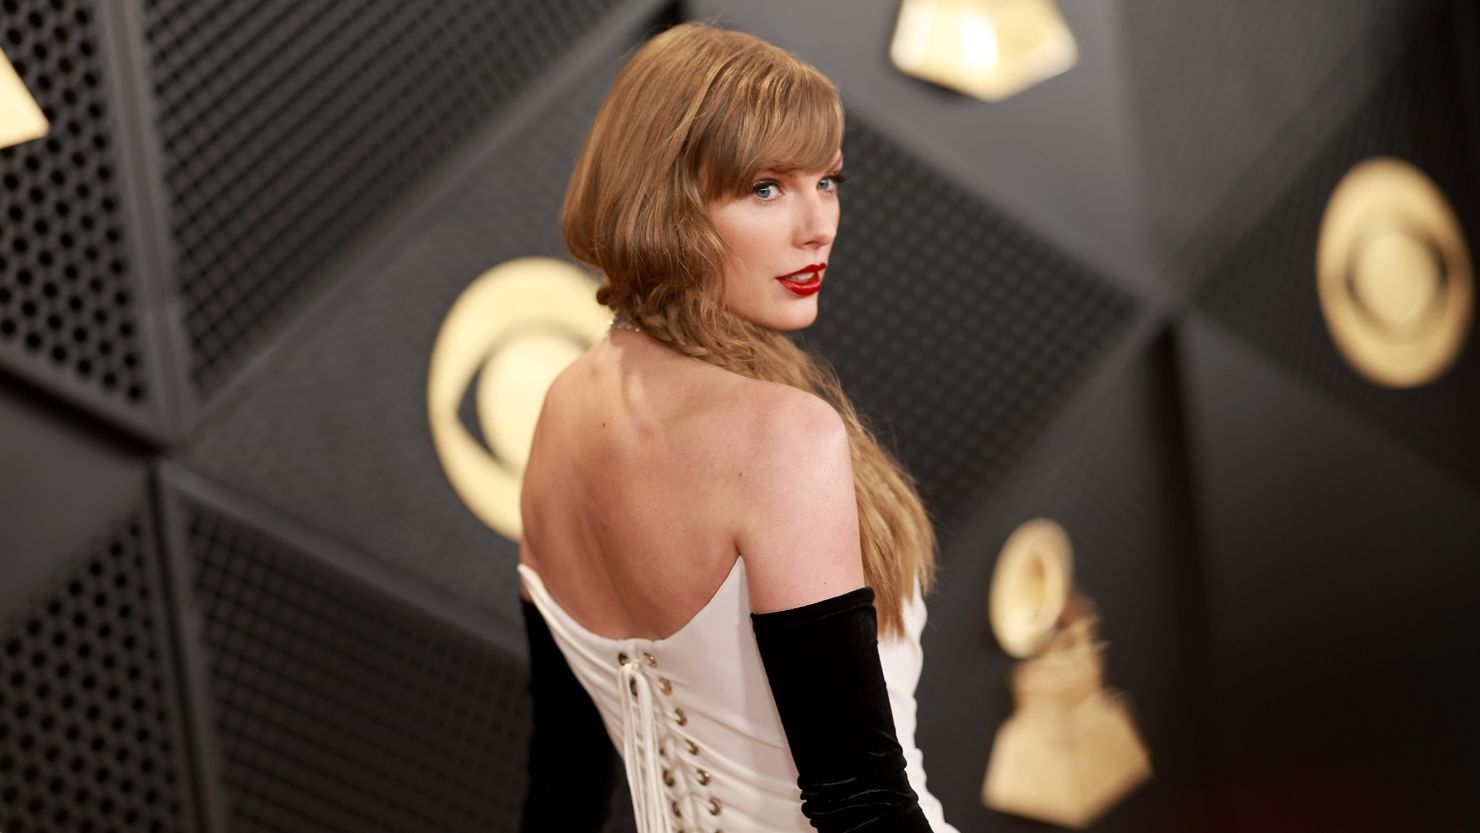 Taylor Swift at the Grammy Awards on Feb. 4 in Los Angeles, California.